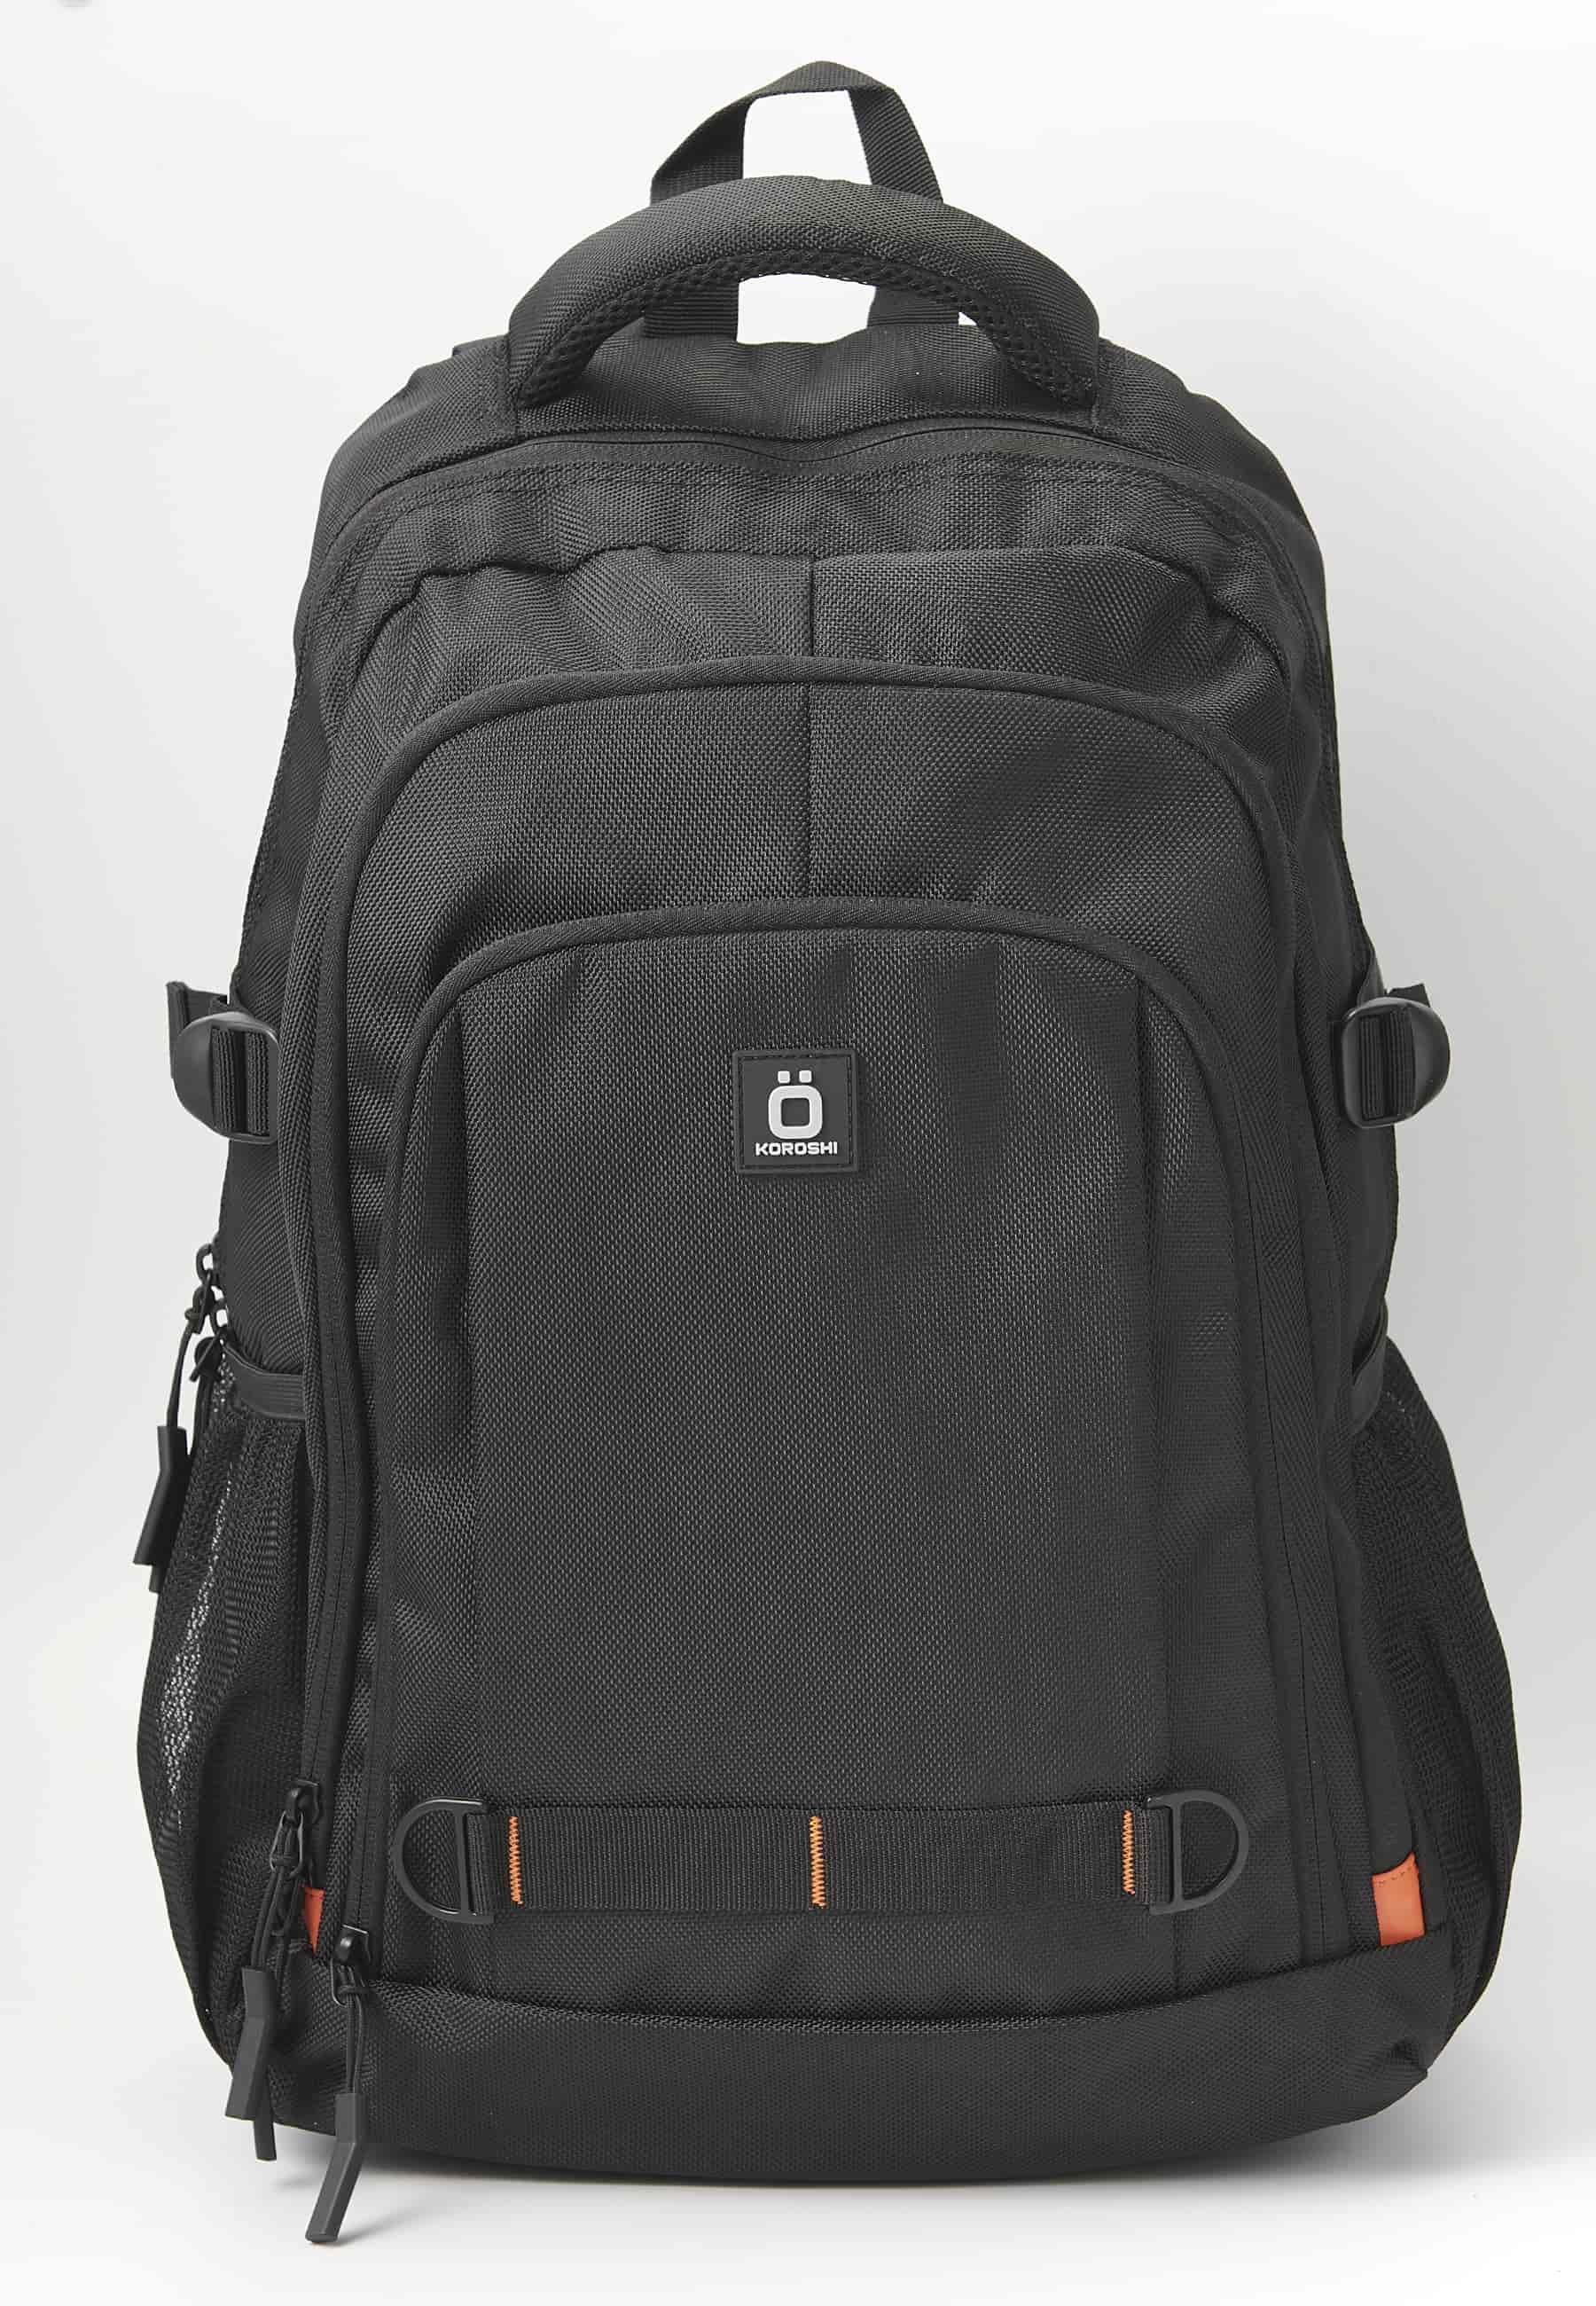 Koröshi backpack with three zippered compartments, one for a laptop, with black interior pockets